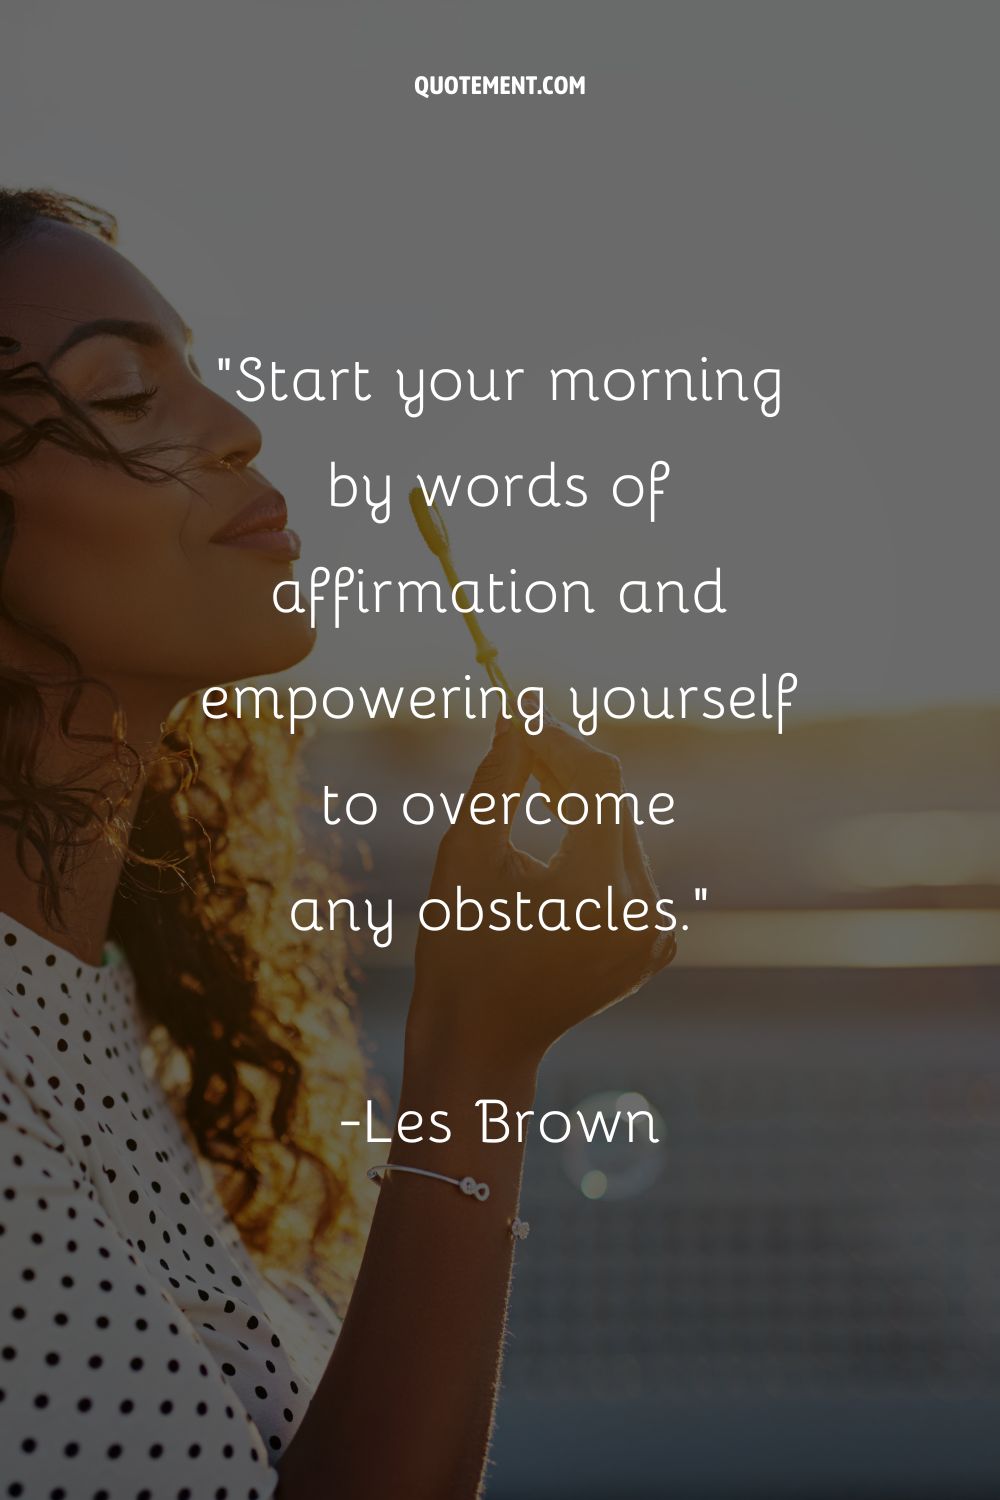 Start your morning by words of affirmation and empowering yourself to overcome any obstacles